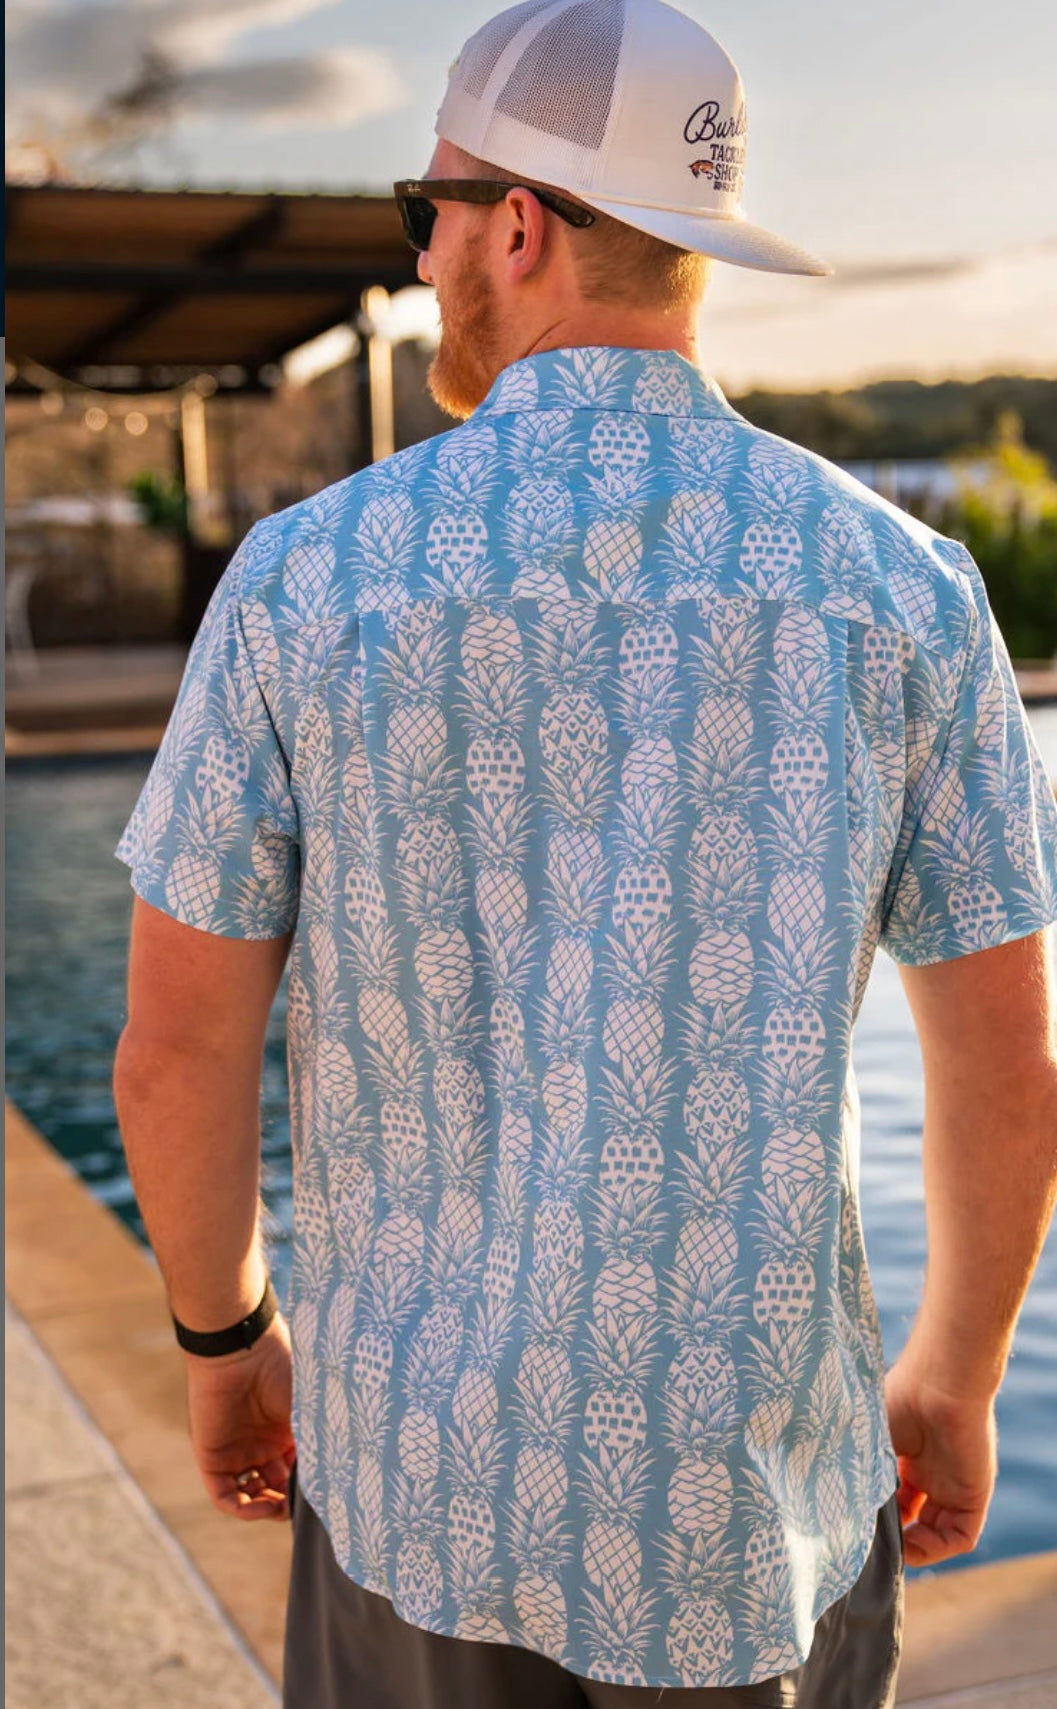 Man modeling the back our light blue, short sleeve button up shirt featuring white pineapples 